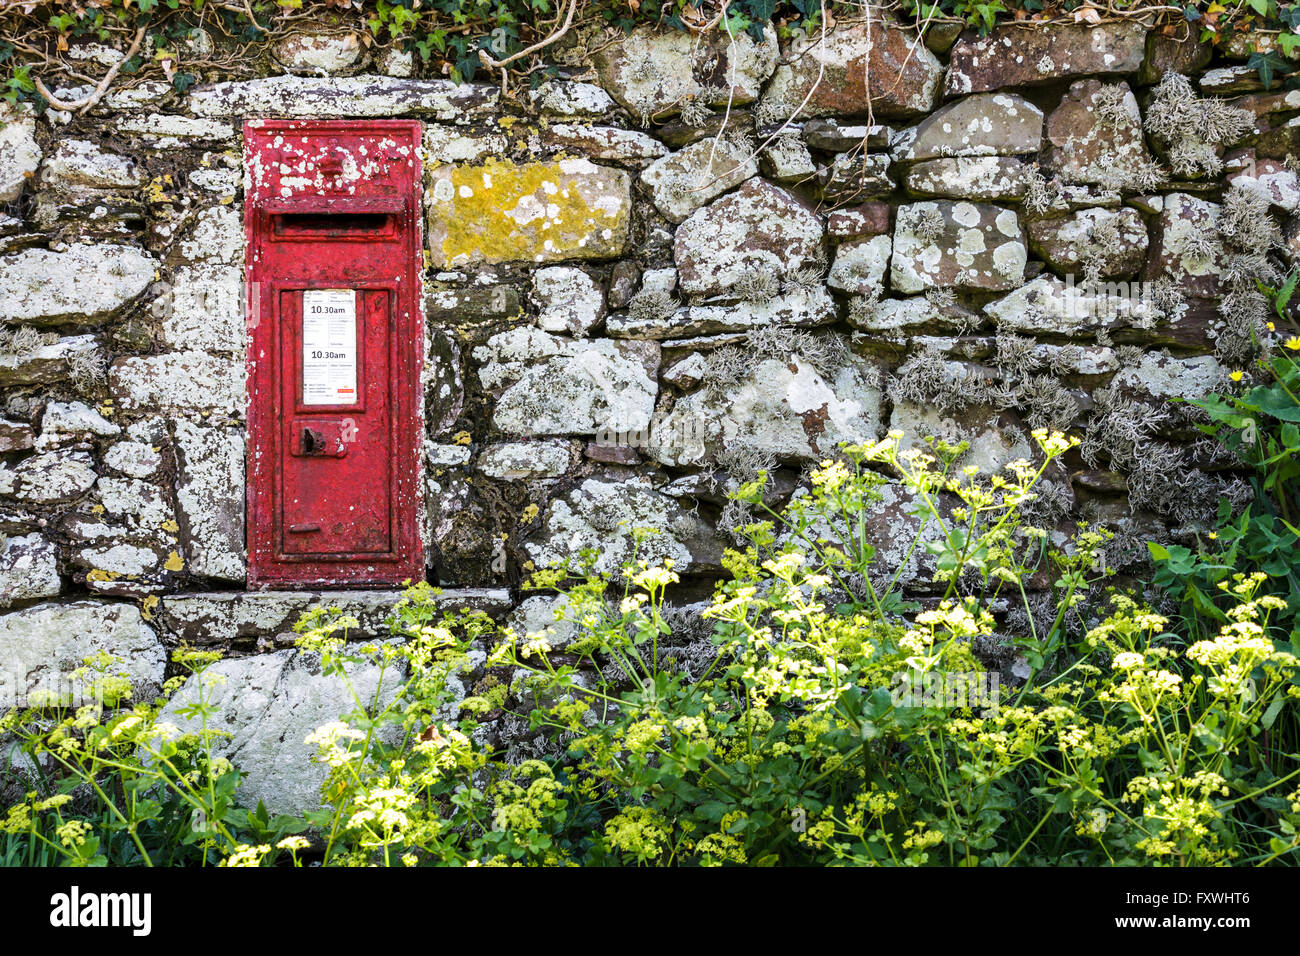 Red post box, St. Justinian's, Pembrokeshire, Wales UK Stock Photo